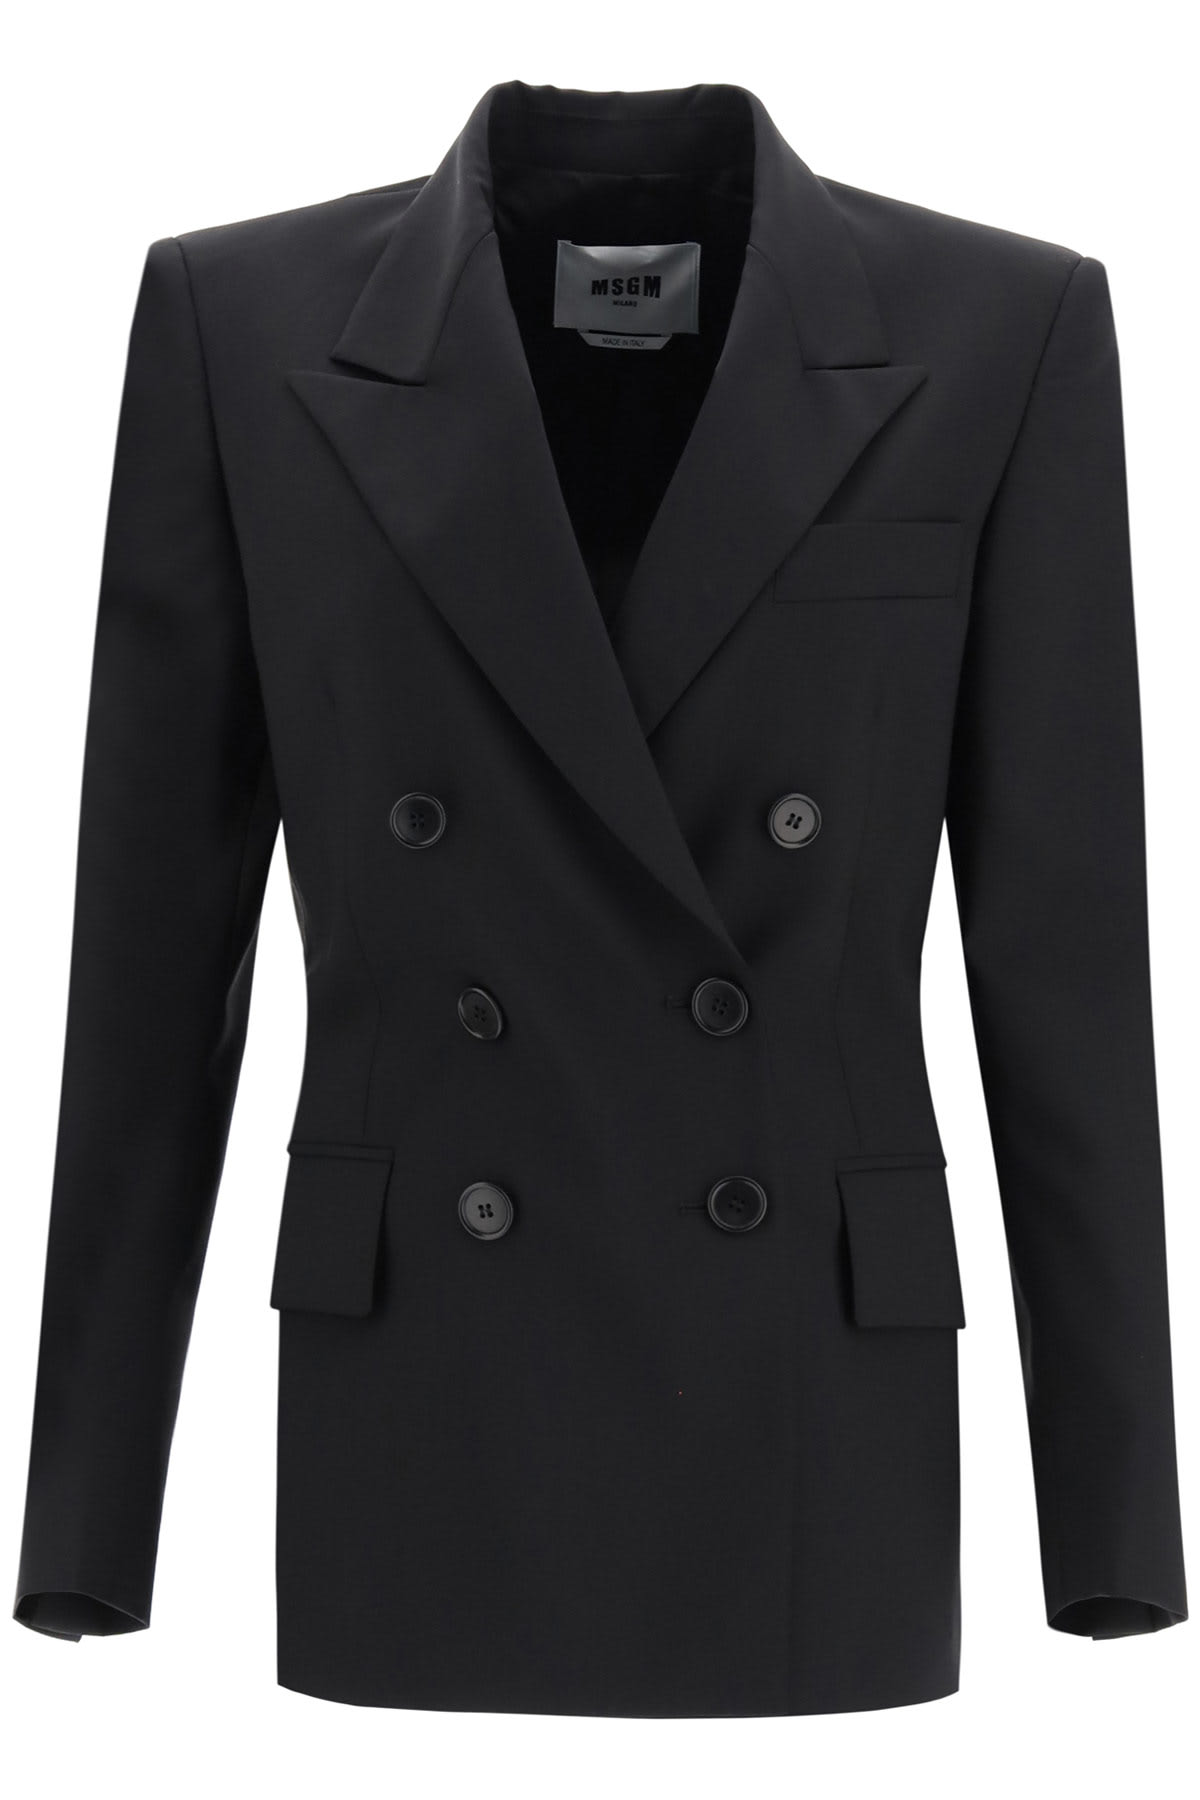 Photo of  MSGM Double-breasted Blazer In Wool Blend- shop MSGM jackets online sales